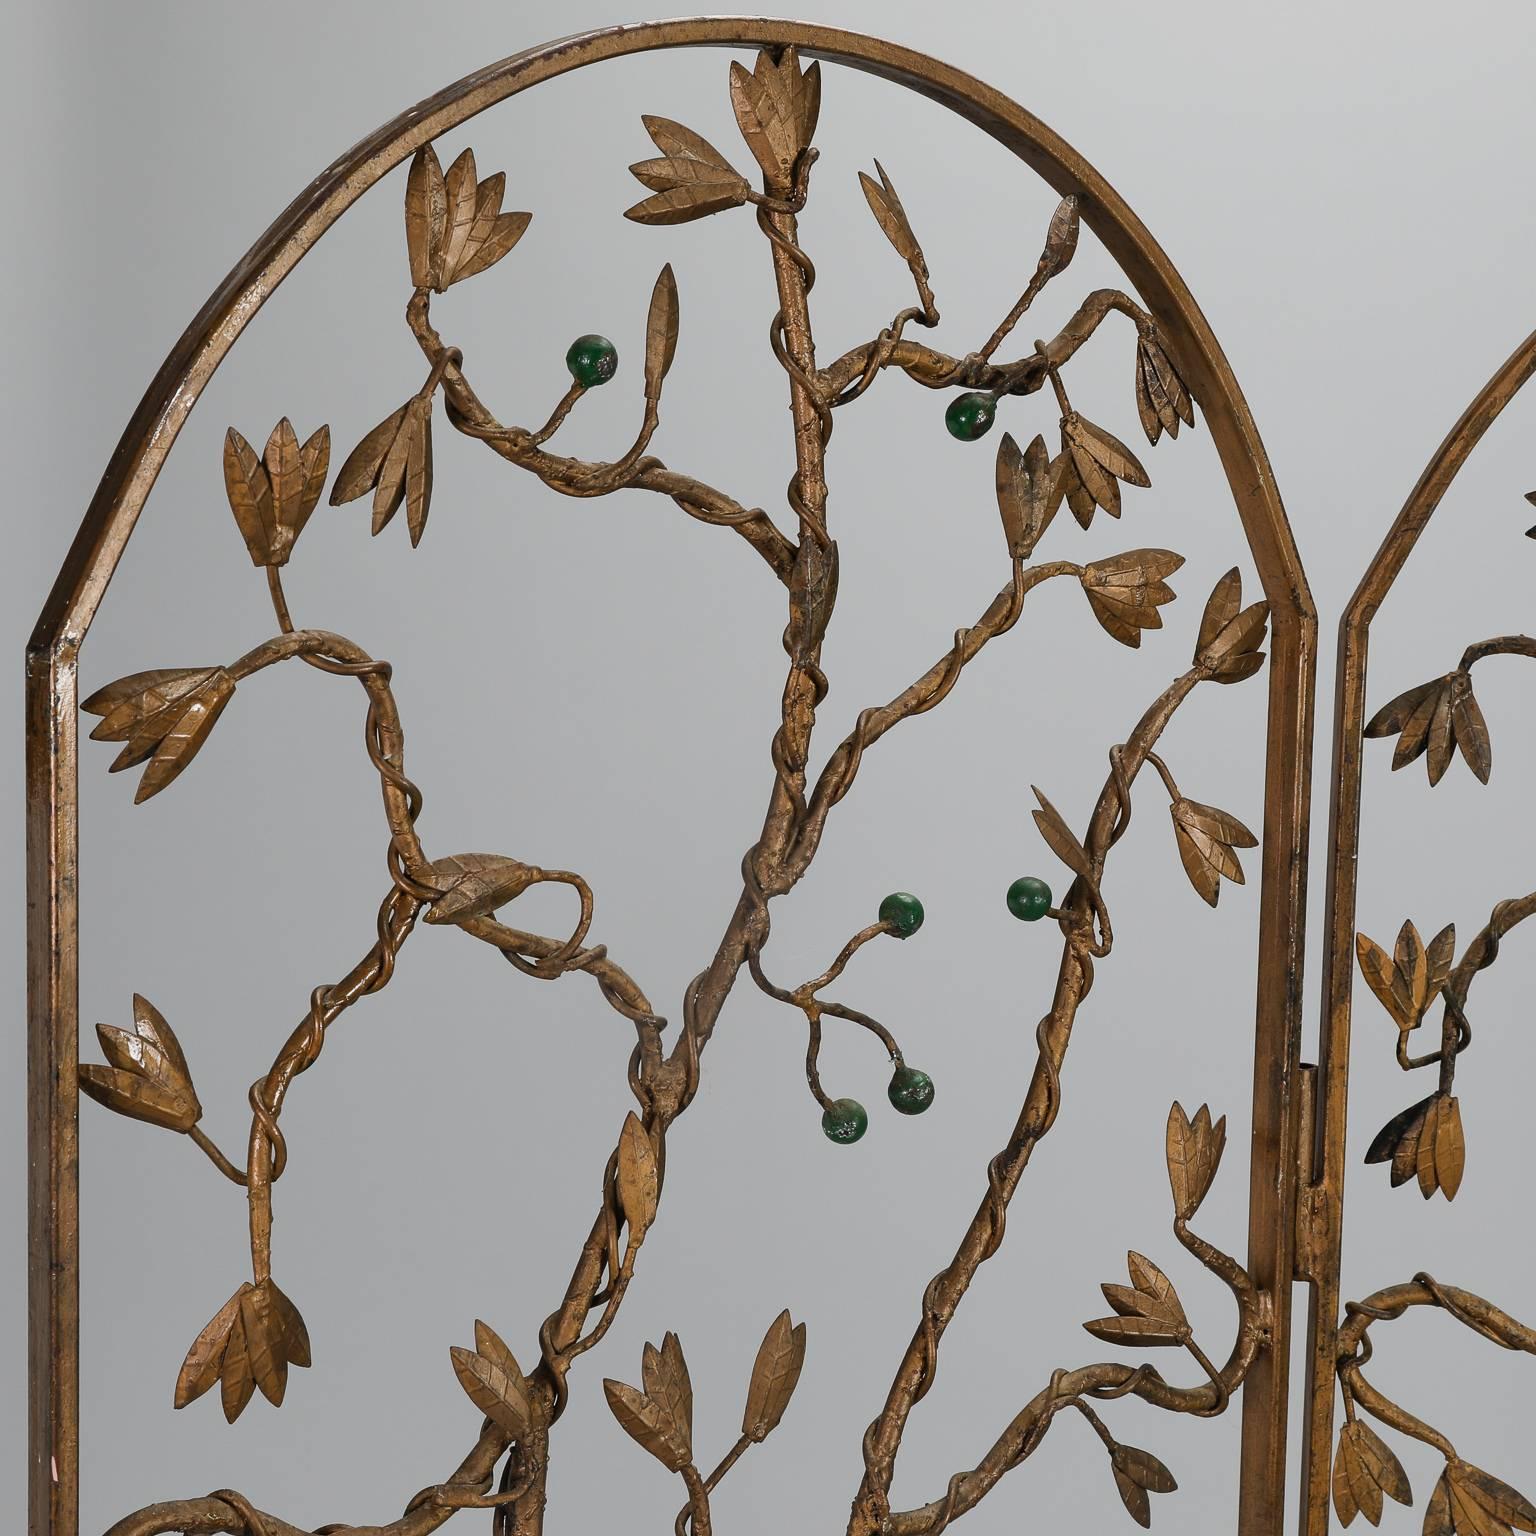 Found in Italy, this circa 1950s metal and iron floor screen has three arched panels with open work vine and berry design. Frame, twigs and leaves have gilded finish with green berries.